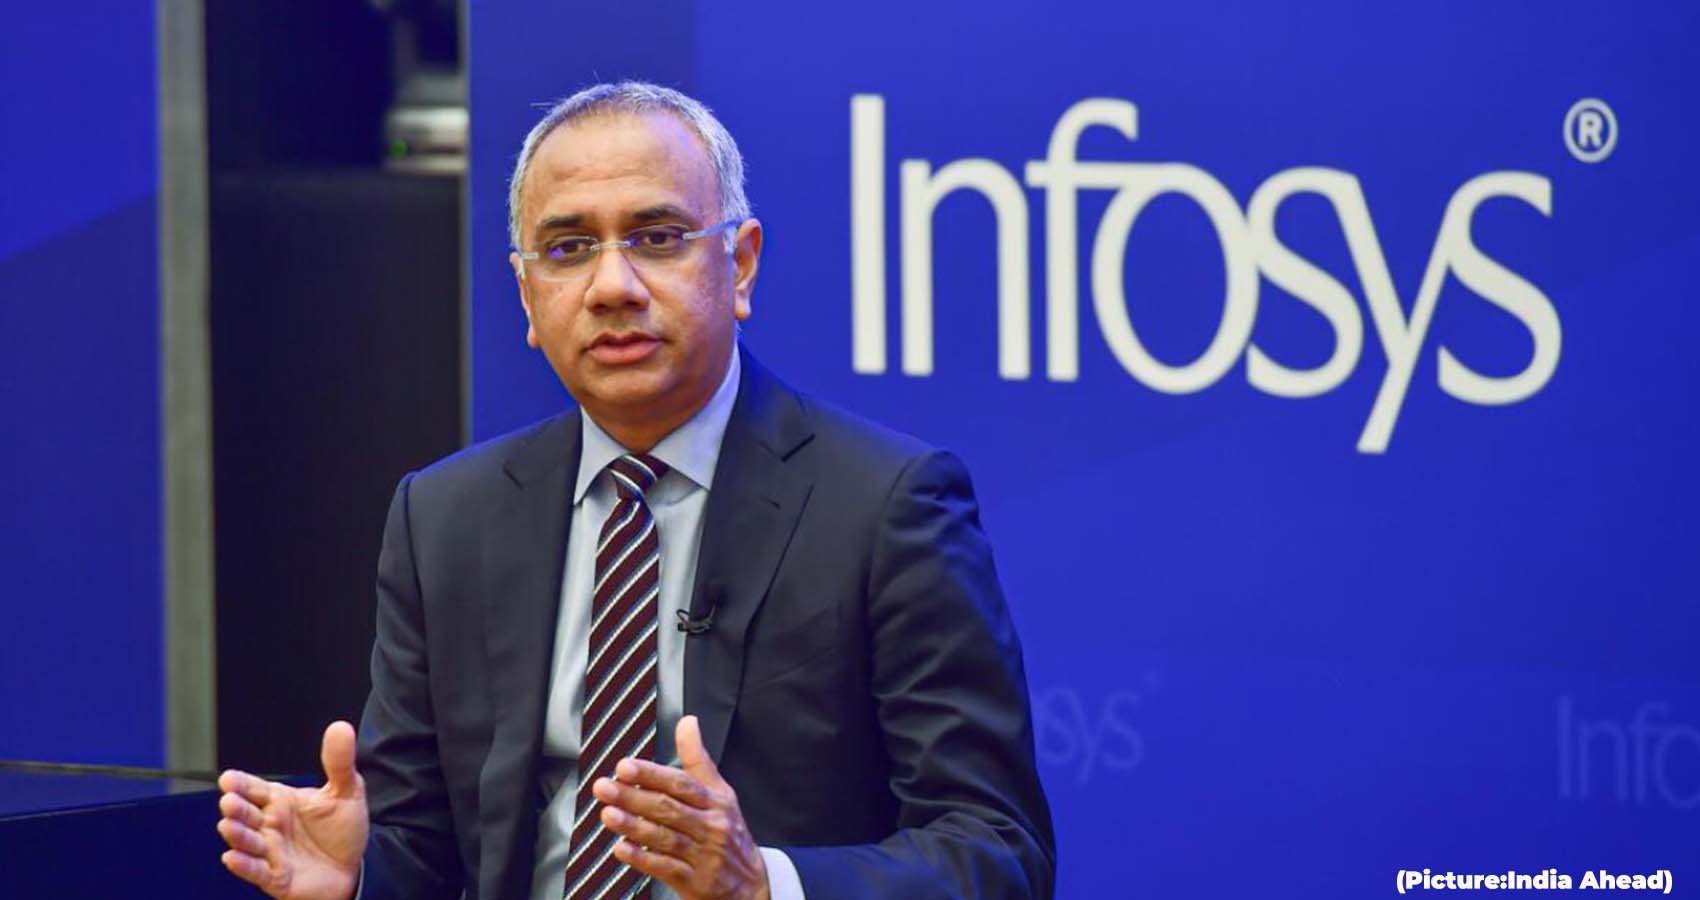 Infosys Raises CEO Salil Parekh’s Salary By 88% To Rs 79.75 Crore Per Annum